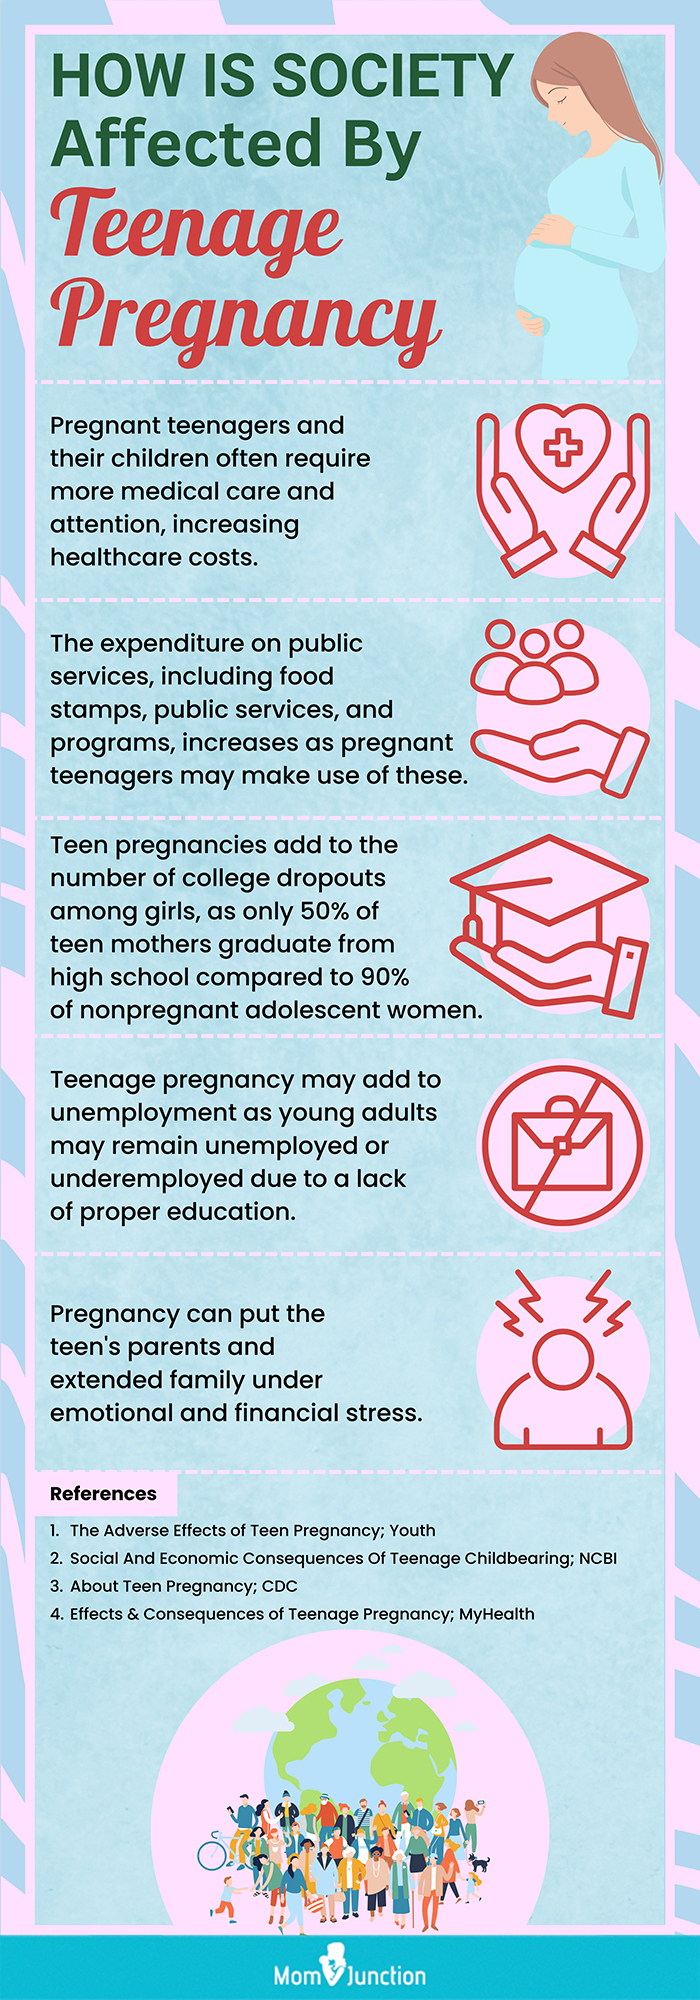 11 Negative Effects Of Teenage Pregnancy On Society hq pic